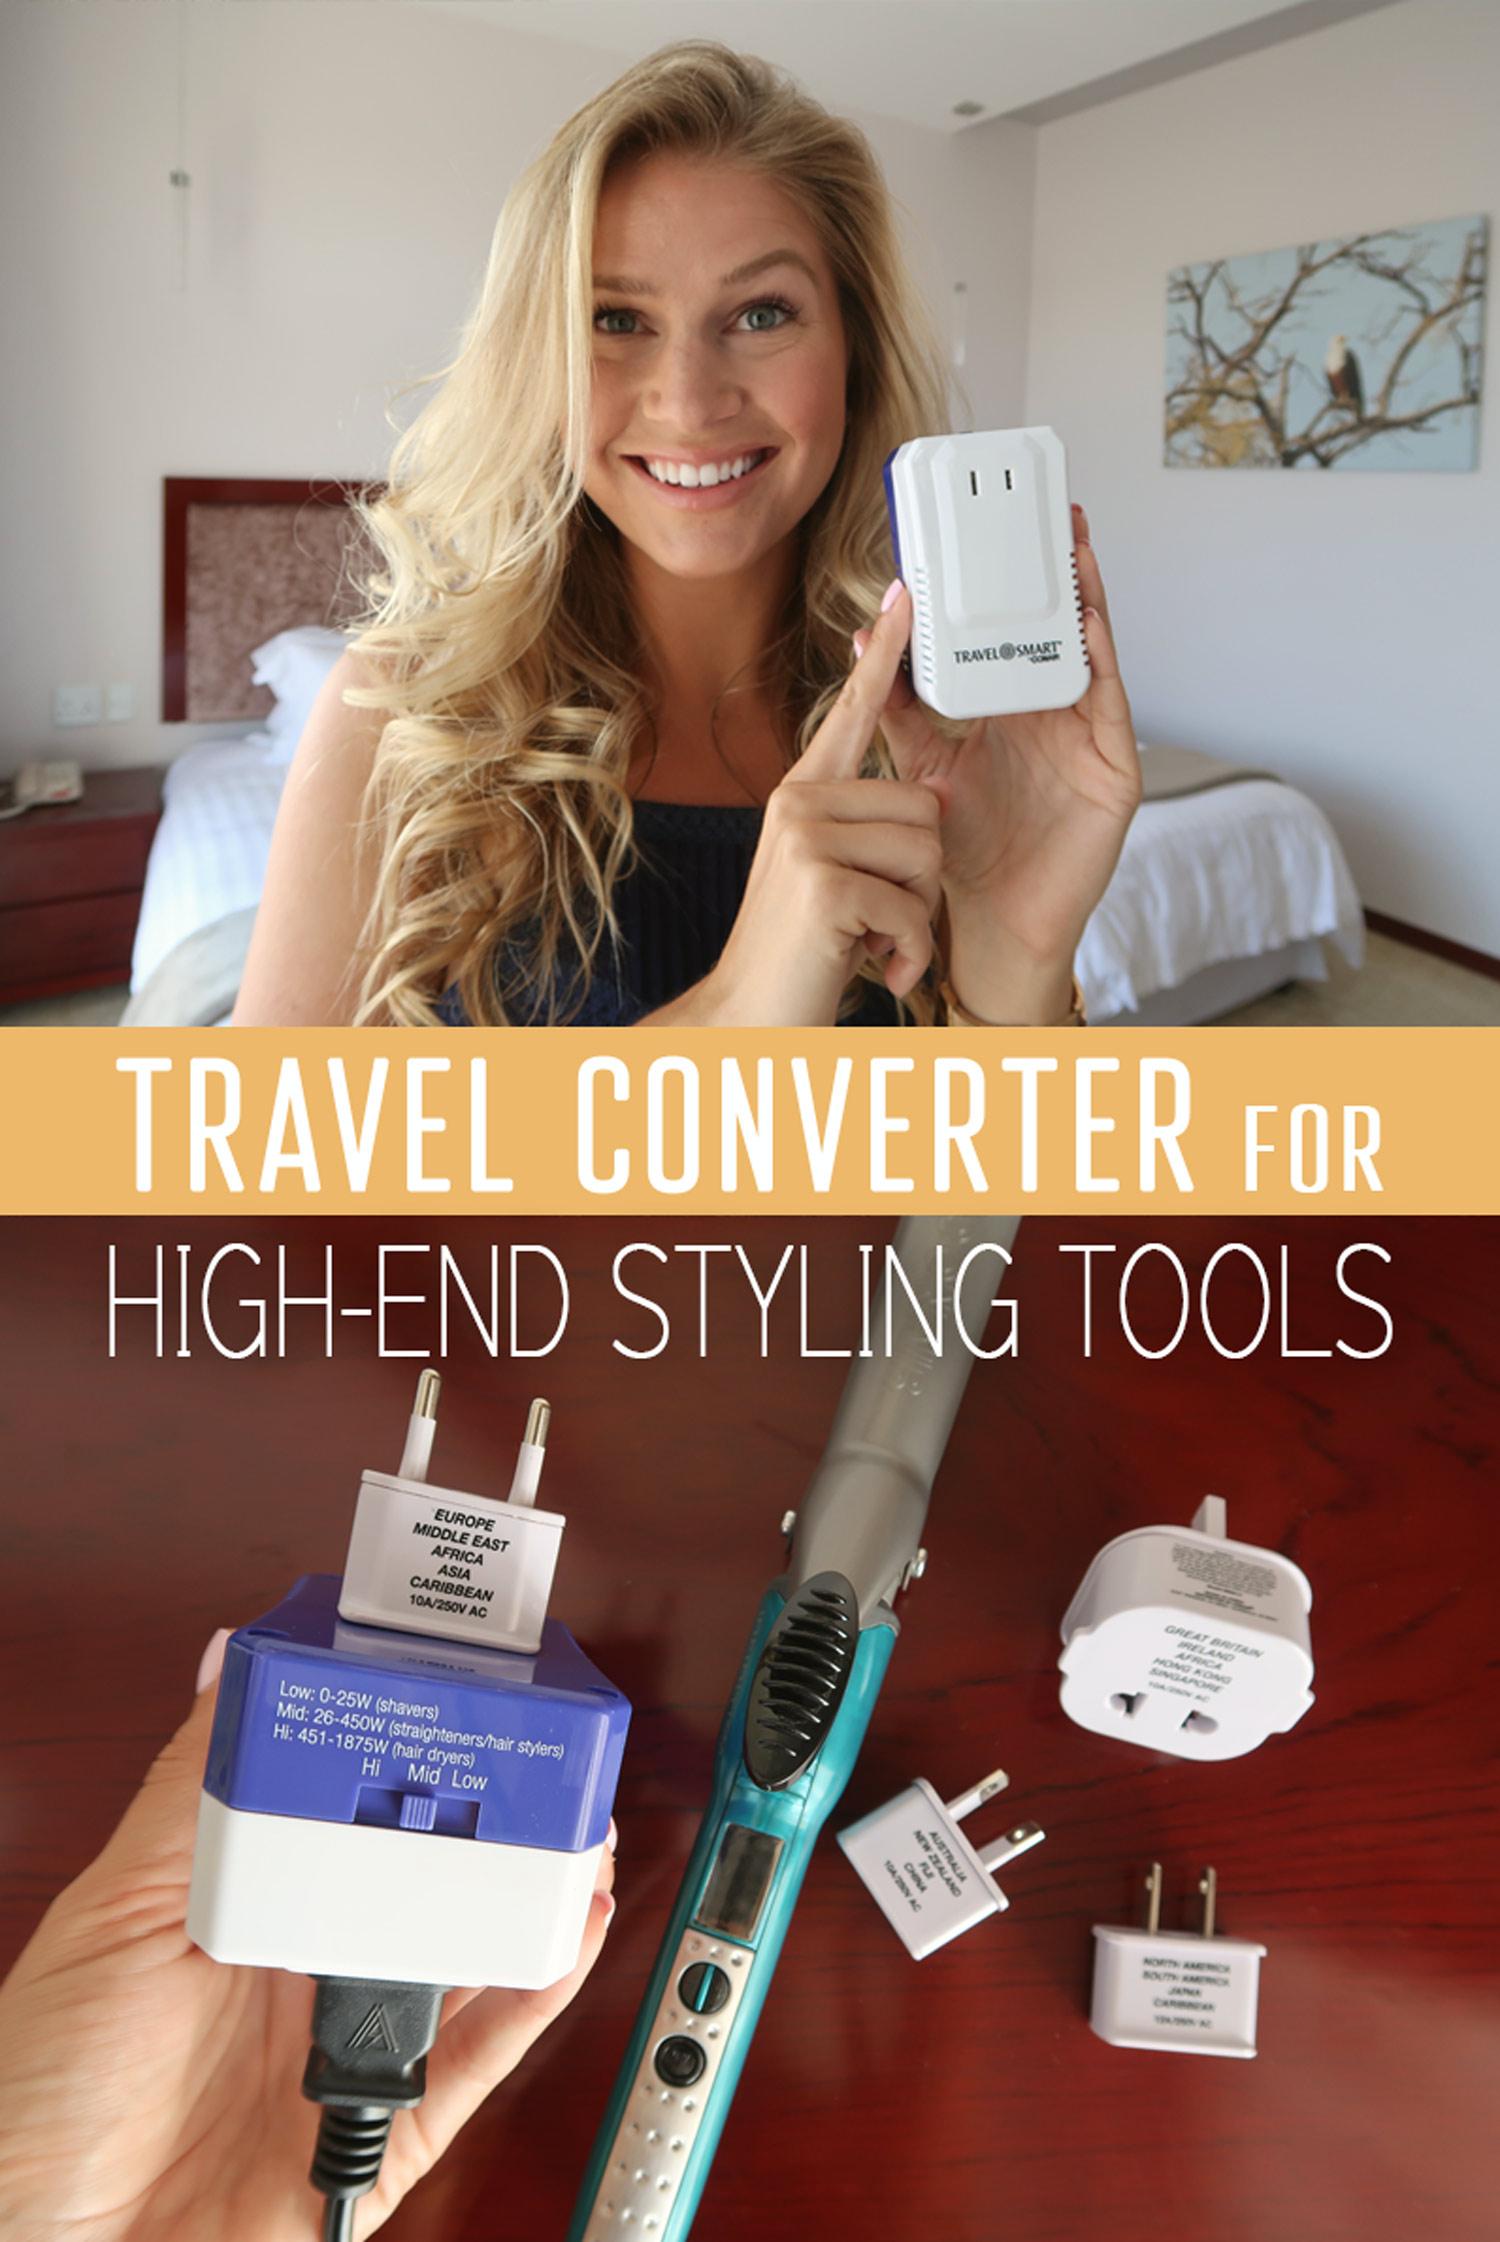 Travel Converter for High-End Styling Tools • The Blonde Abroad